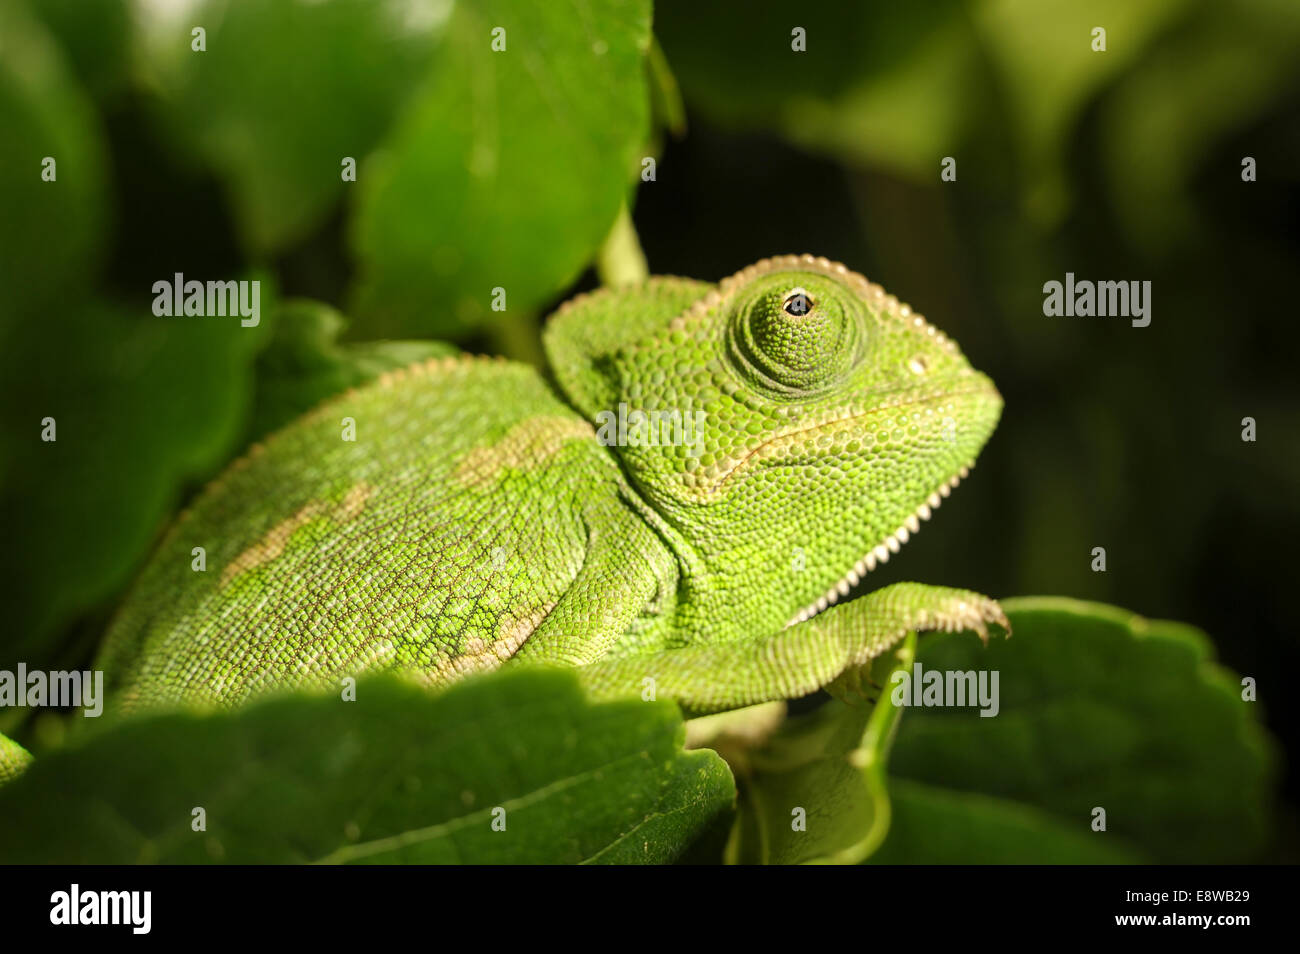 Common Chameleon (Chamaeleo chamaeleon), The common chameleon and its subspecies are found throughout much of North Africa and t Stock Photo